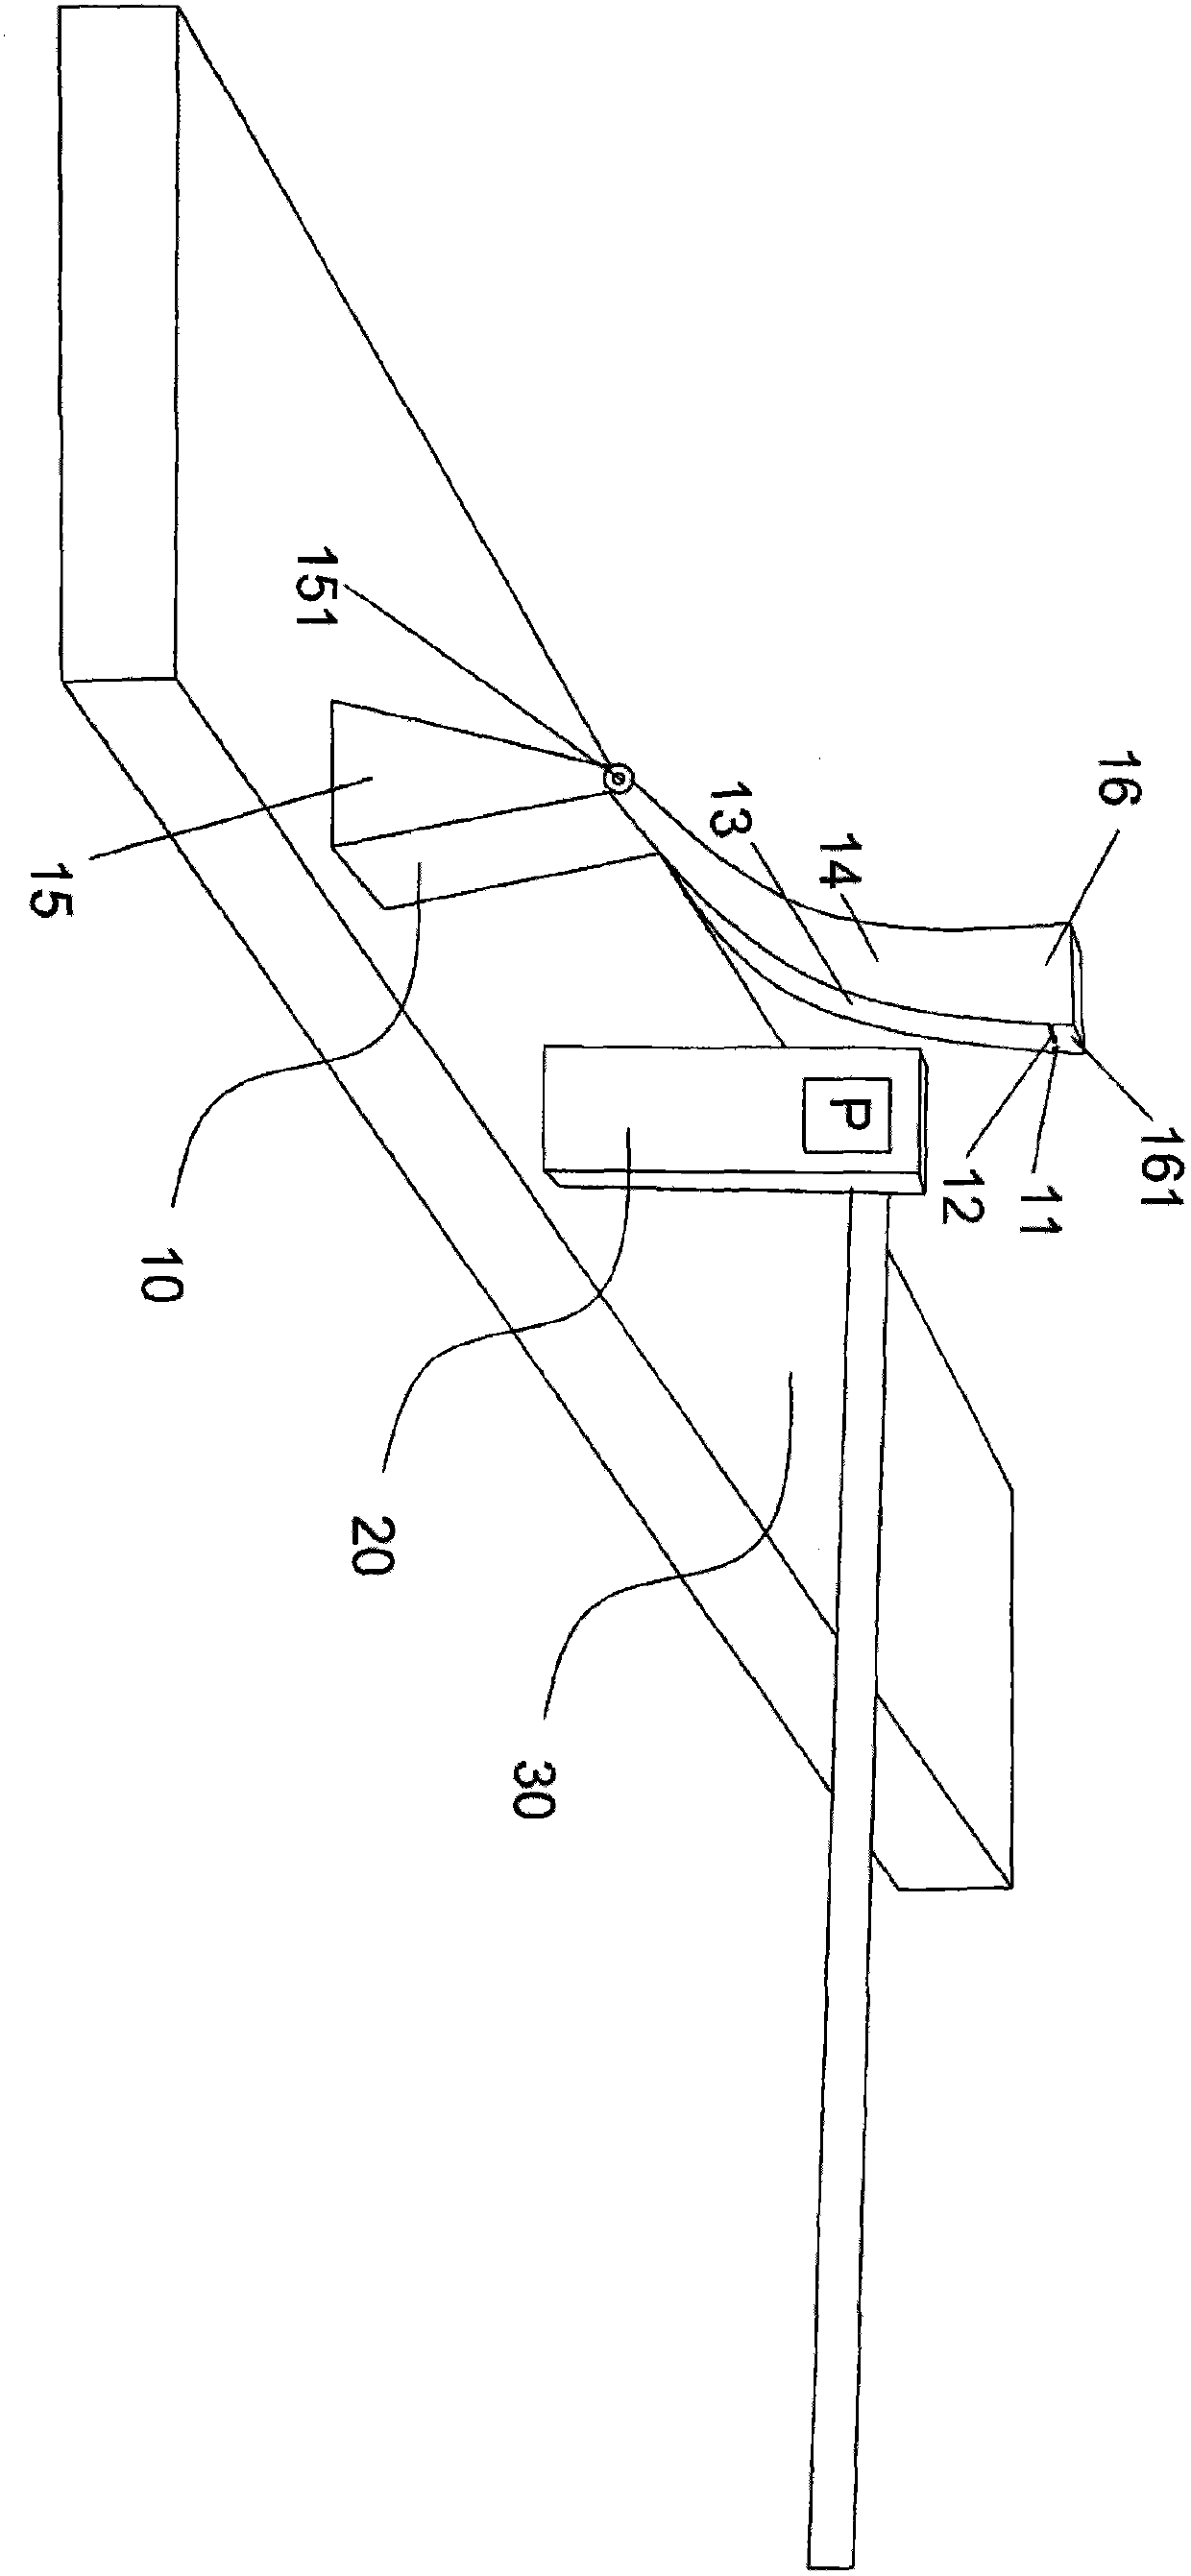 Toll collecting device capable of automatically approaching automobile